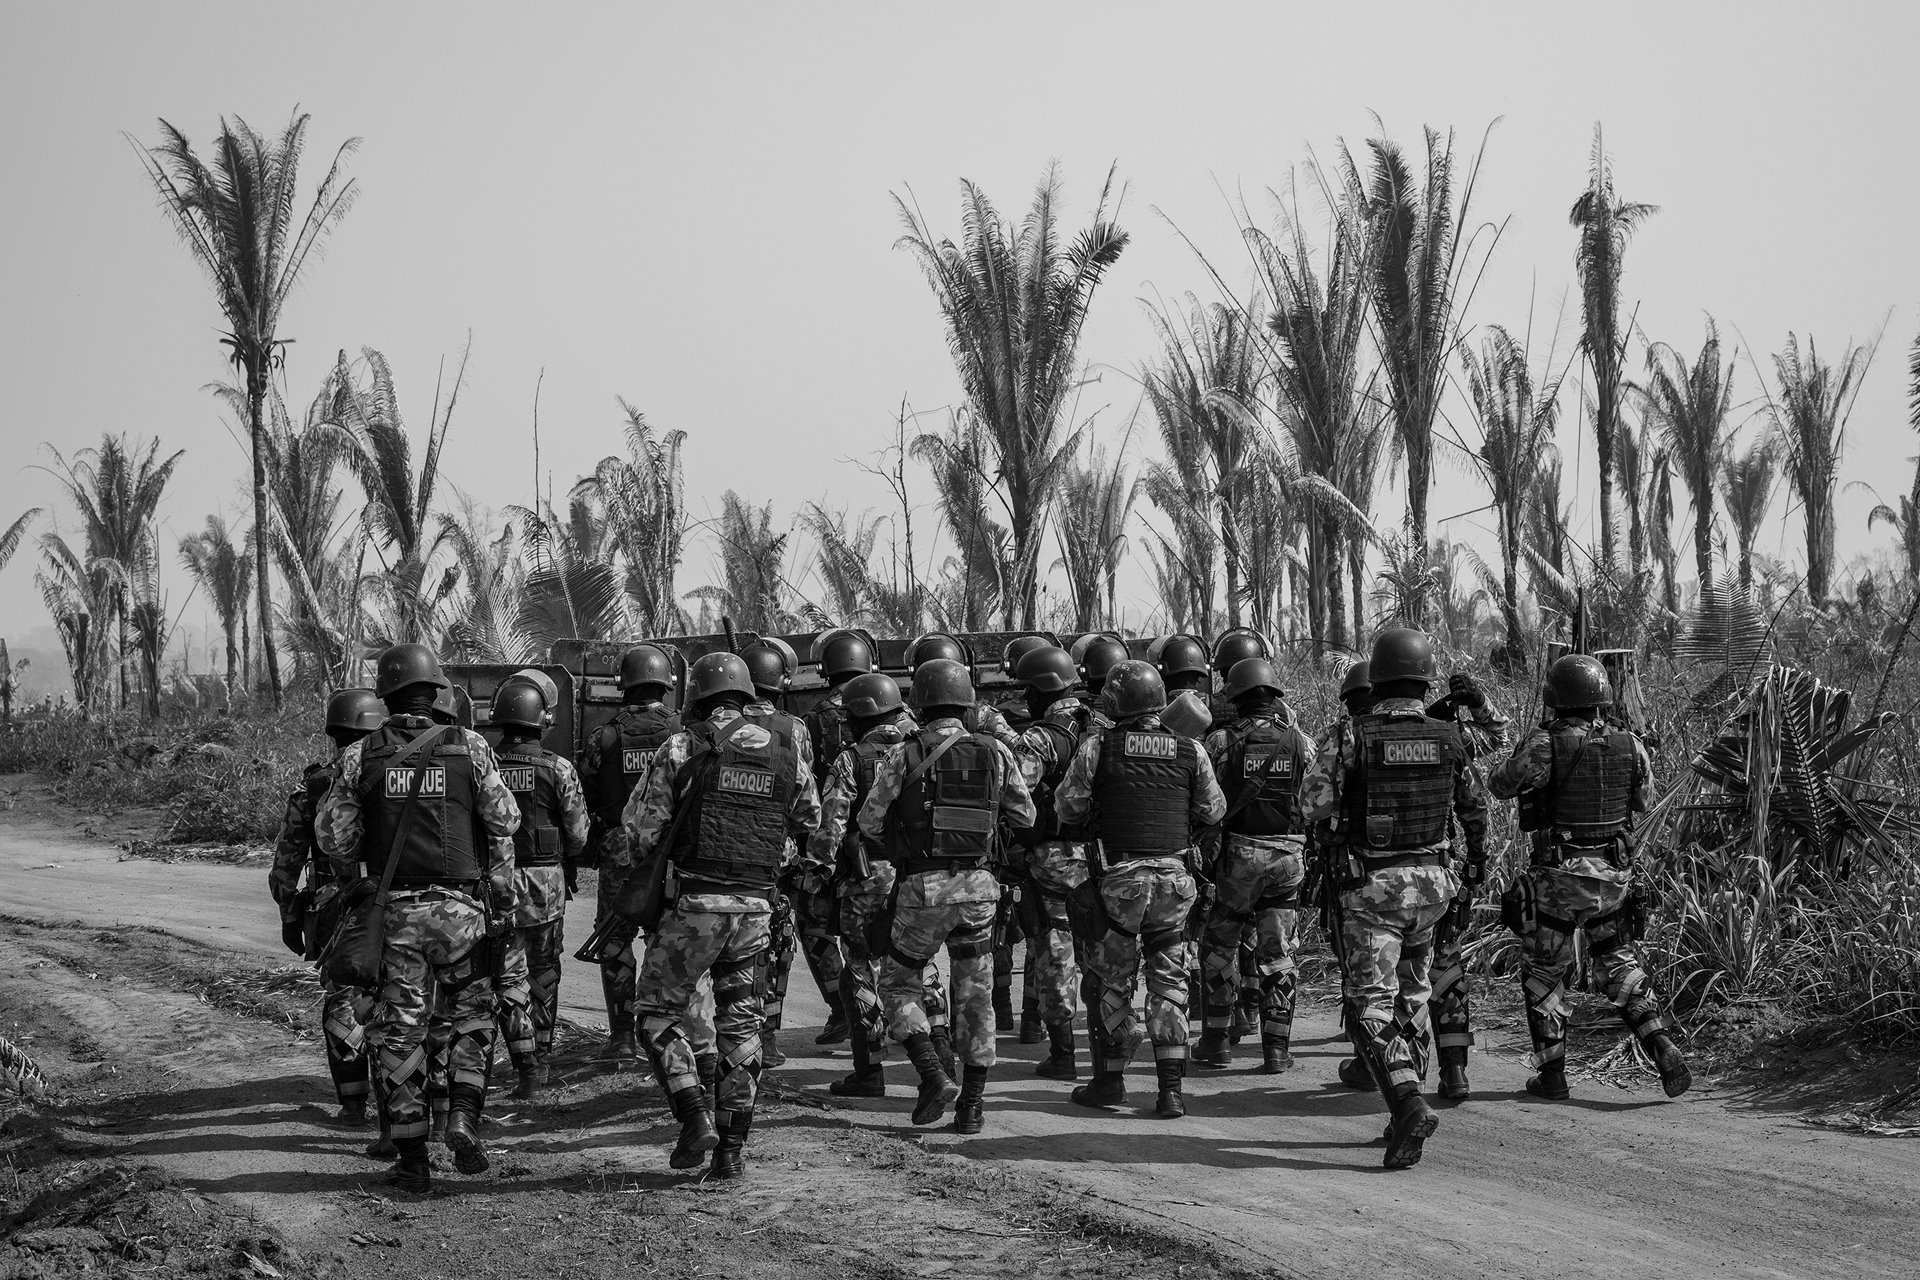 Riot police walk down a road inside the Bom Futuro National Forest, in Rondônia, in the Brazilian Amazon, to remove invaders who had set up a camp with about 200 shacks inside the reserve. Such camps are usually set up for purposes such as illegal logging. In 2019, Bom Futuro lost 874 hectares of forest, according to &nbsp;the National Institute for Space Research (INPE). This represented the largest loss of vegetation cover in the conservation area in 12 years. Deforestation of the reserve increased to 1,135 hectares the following year.